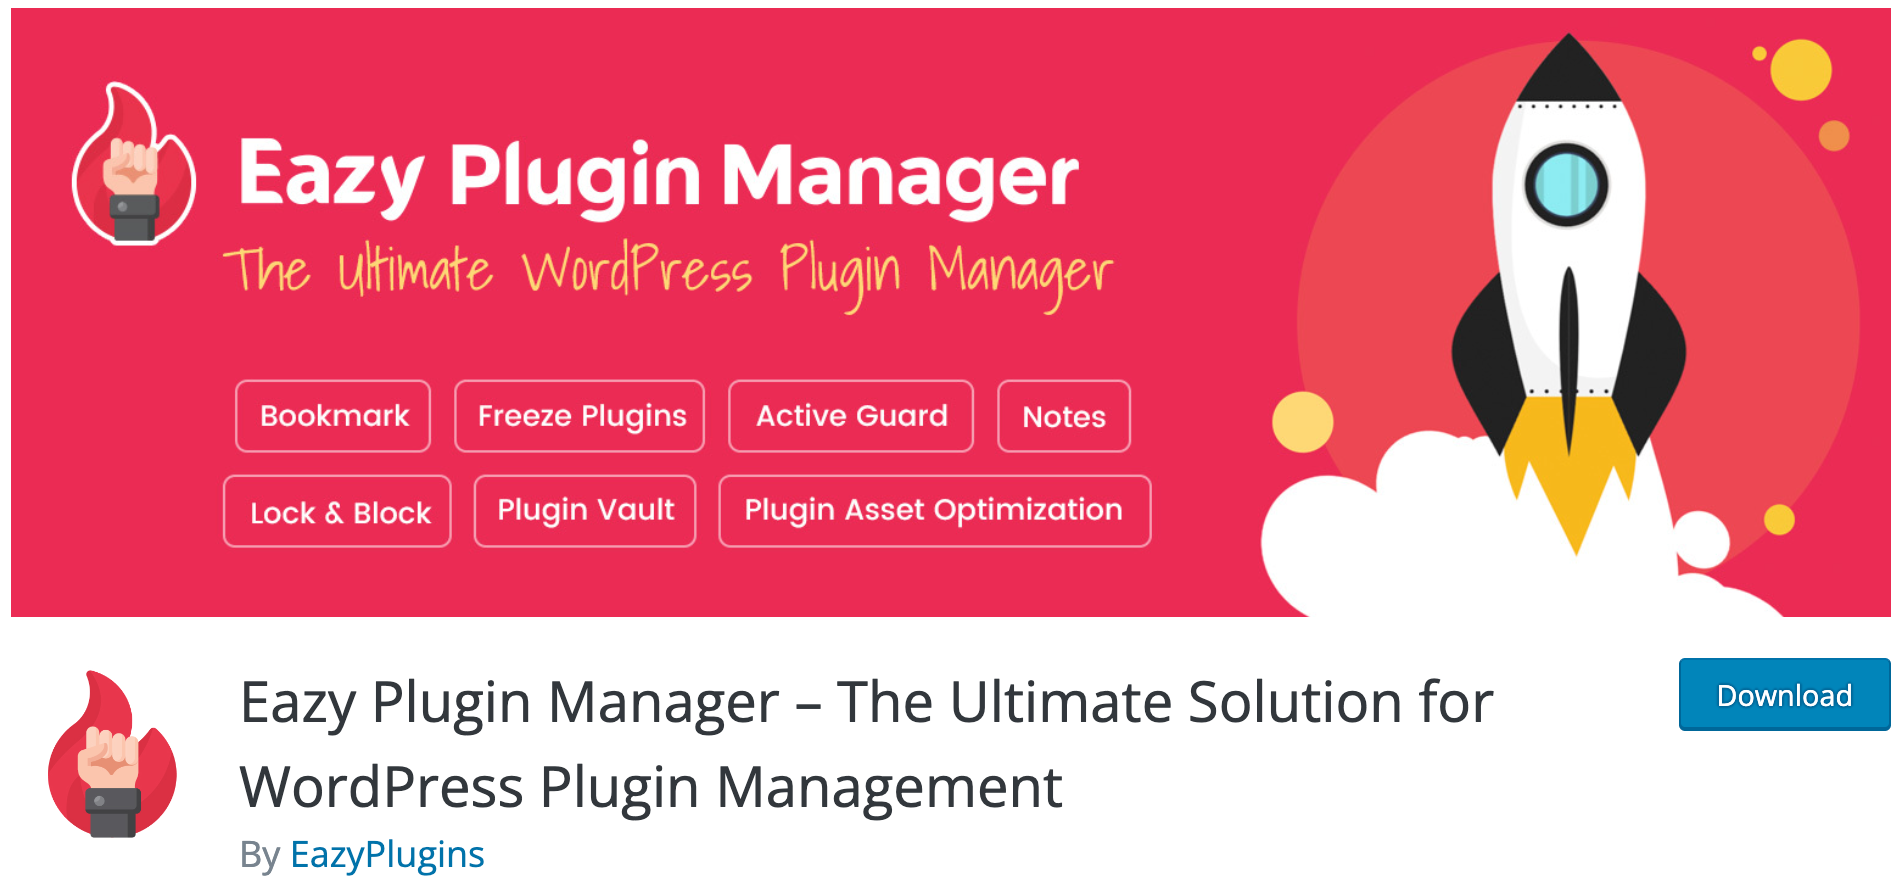 How does the Easy Plugin Manager work?